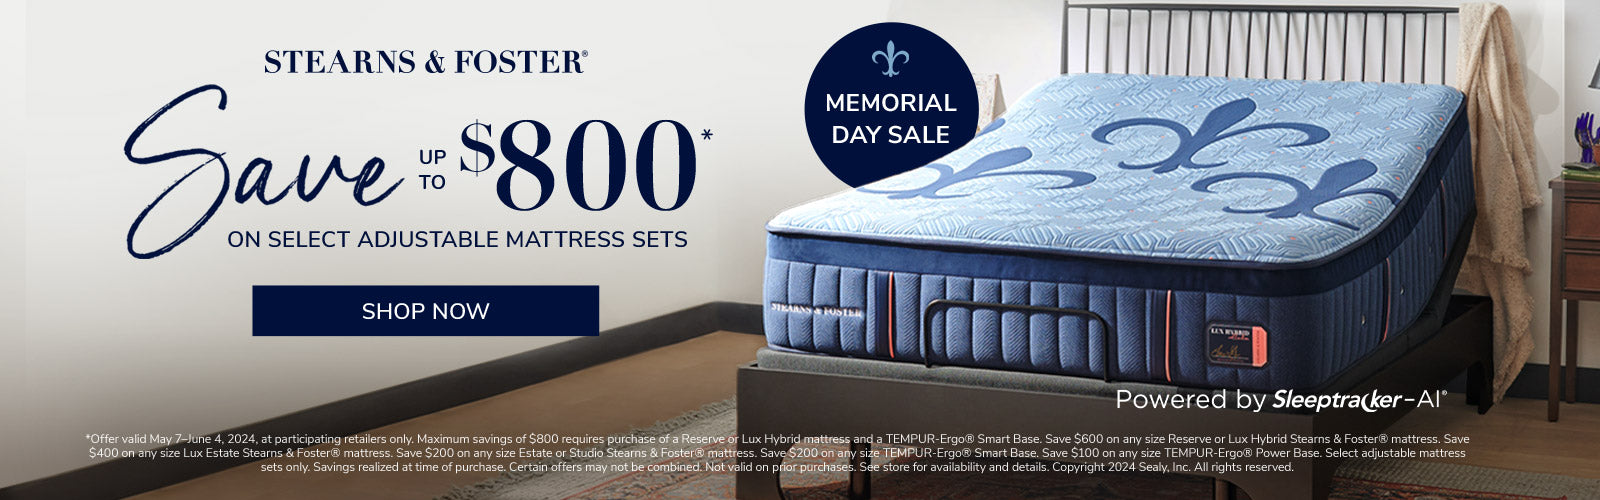 Stearns & Foster Memorial Day Sale - Save up to $800 on Select Adjustable Mattress Sets